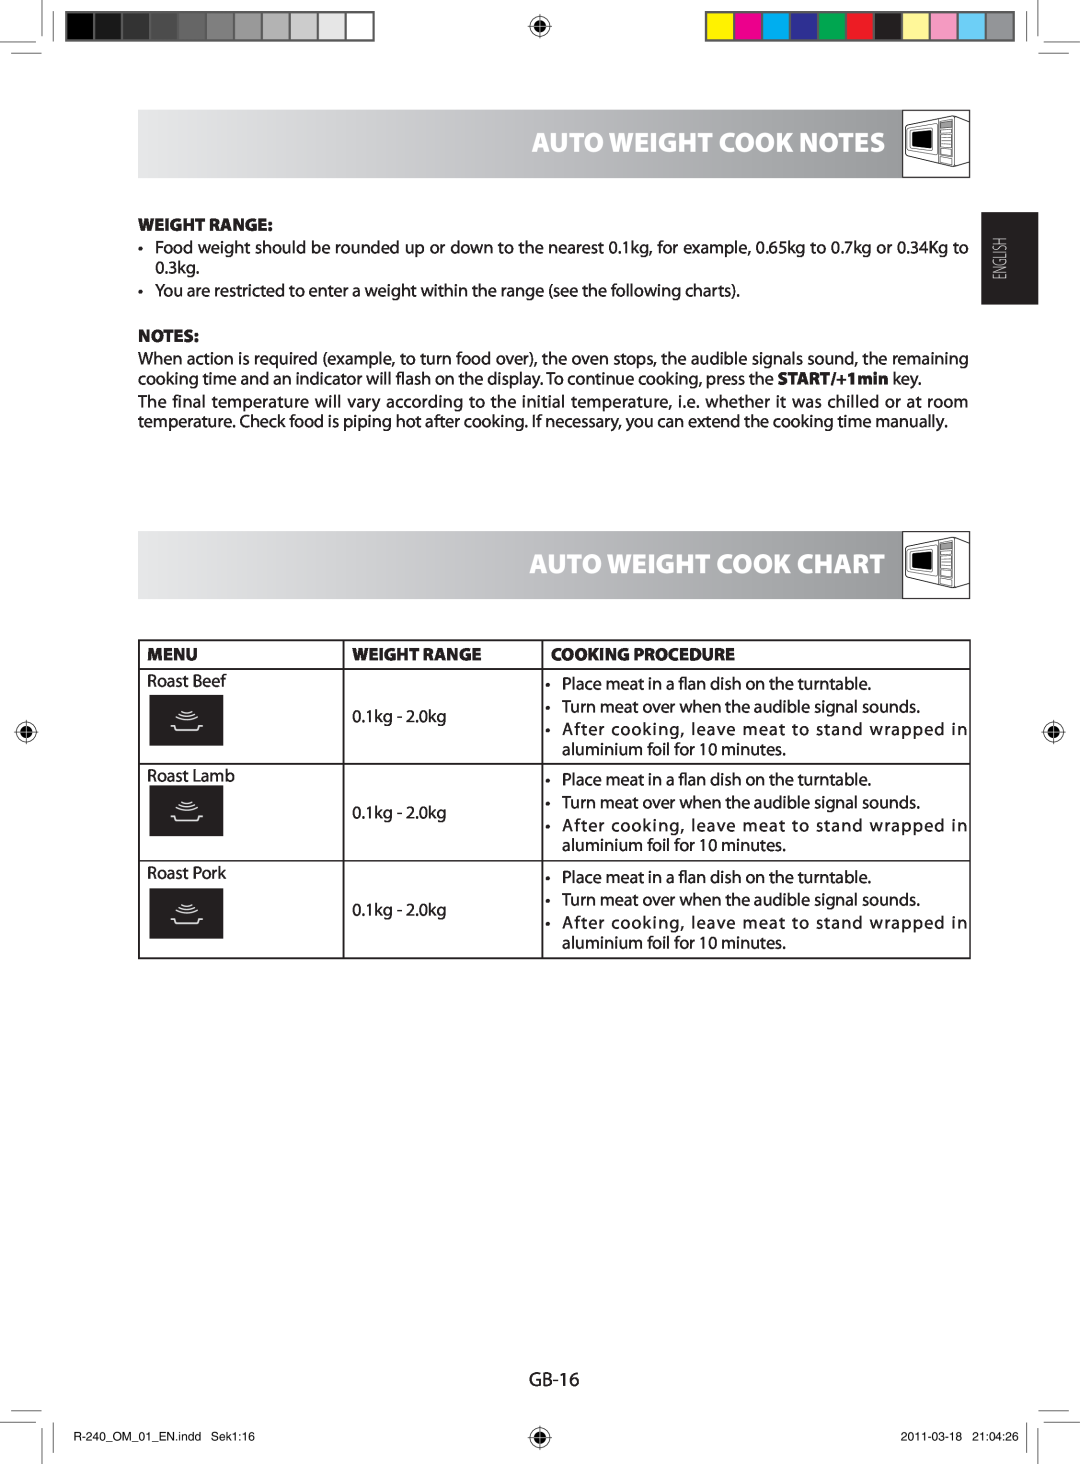 Sharp R-240 manual Auto Weight Cook Notes, Auto Weight Cook Chart, GB-16 